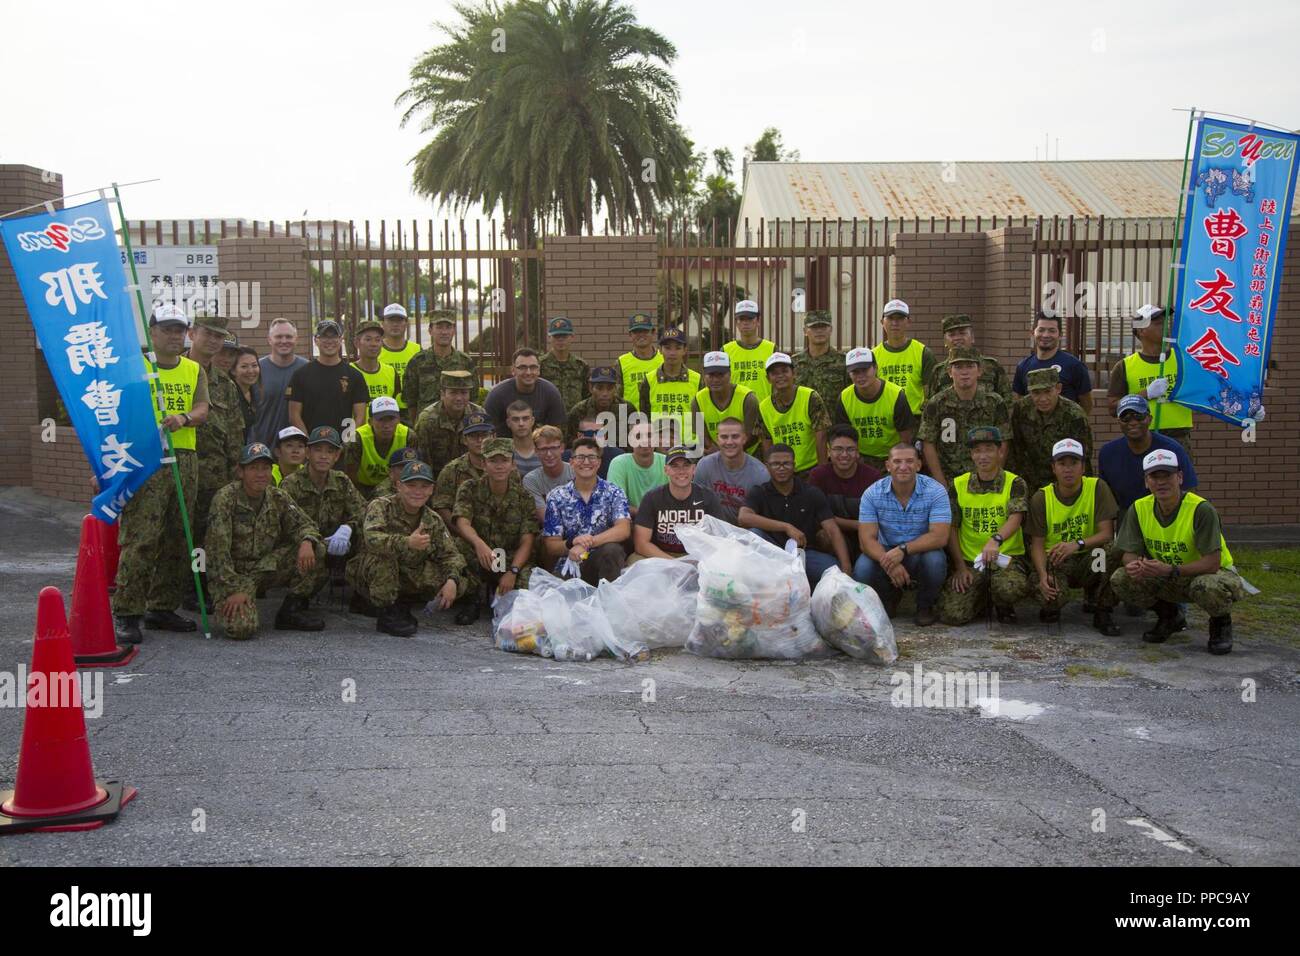 NAHA, OKINAWA, Japan- Japan Ground Self-Defense Force service members and members of the Single Marine Program Pose for a photo Aug 21 after a cleanup around the perimeter of Camp Naha, Okinawa, Japan. The cleanup allowed JGSDF and members of the SMP a chance to meet each other while also cleaning up the city. This was the first time the SMP conducted a cleanup at Camp Naha and plans to make it a regular event. Stock Photo